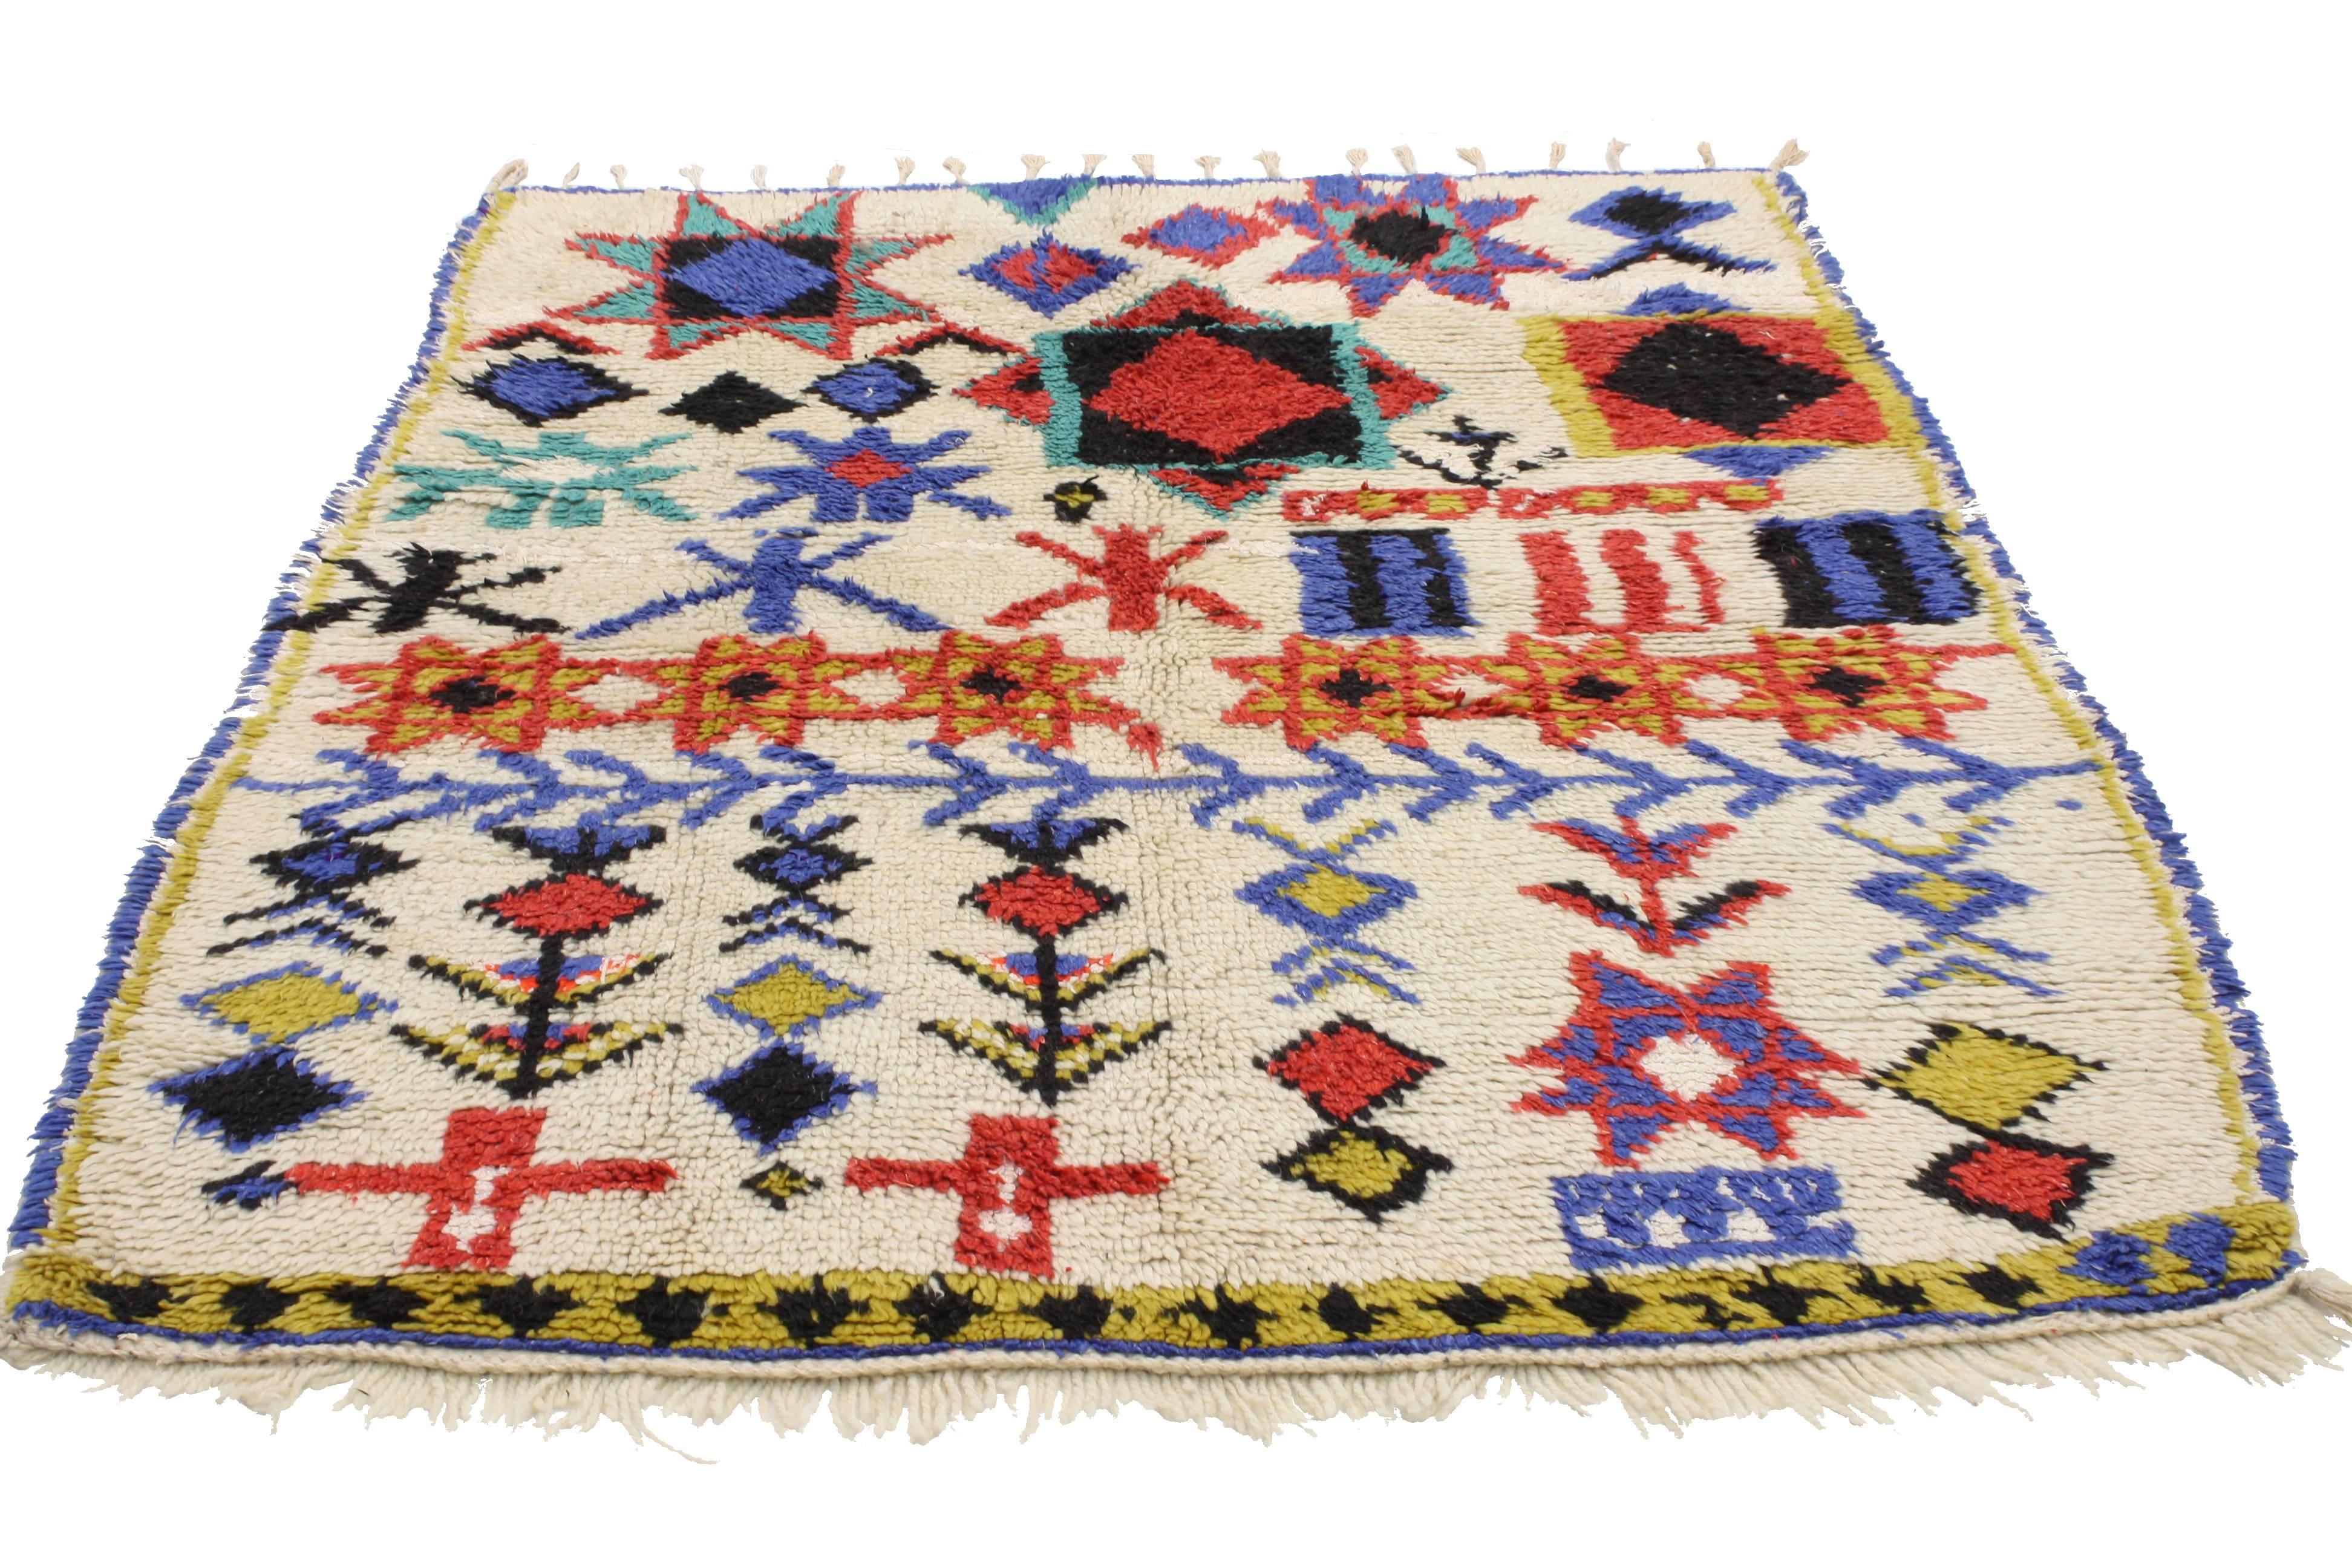 Hand-Knotted Vintage Berber Moroccan Azilal Rug with Modern Tribal Style